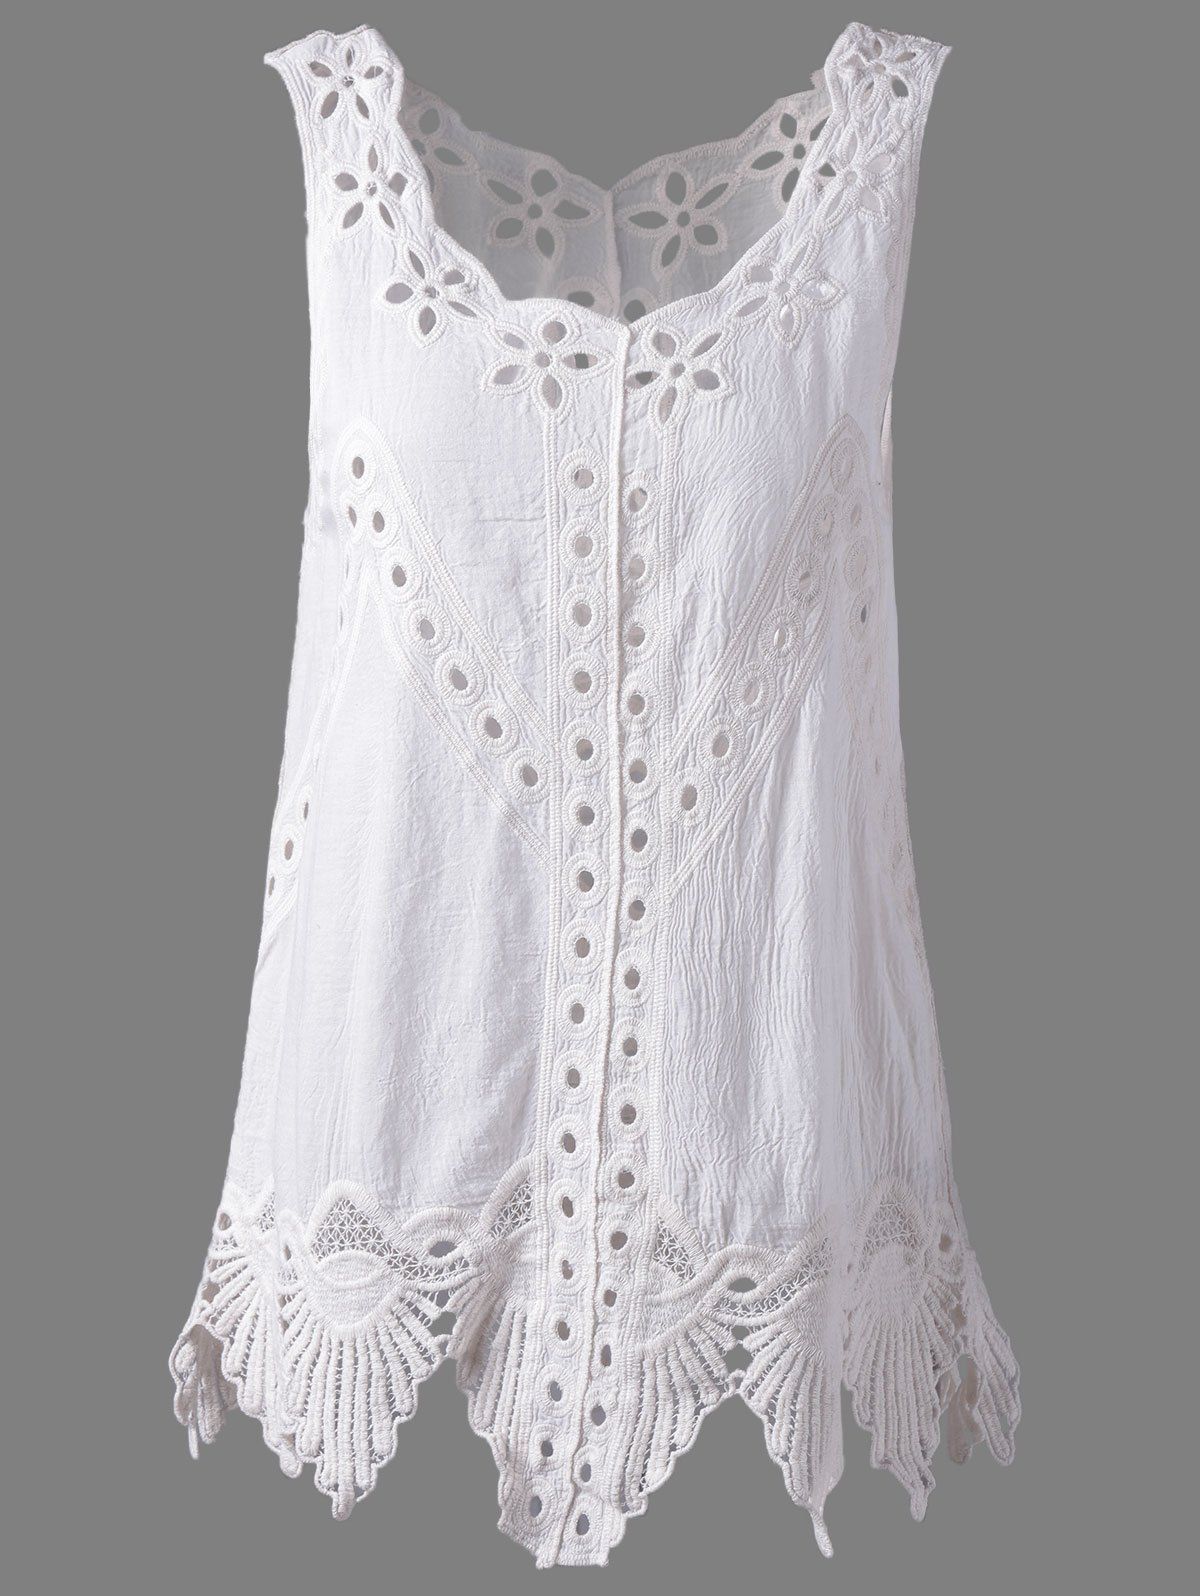 Bohemian Women's Scoop Neck Solid Color Crochet Sleeveless Blouse - WHITE ONE SIZE